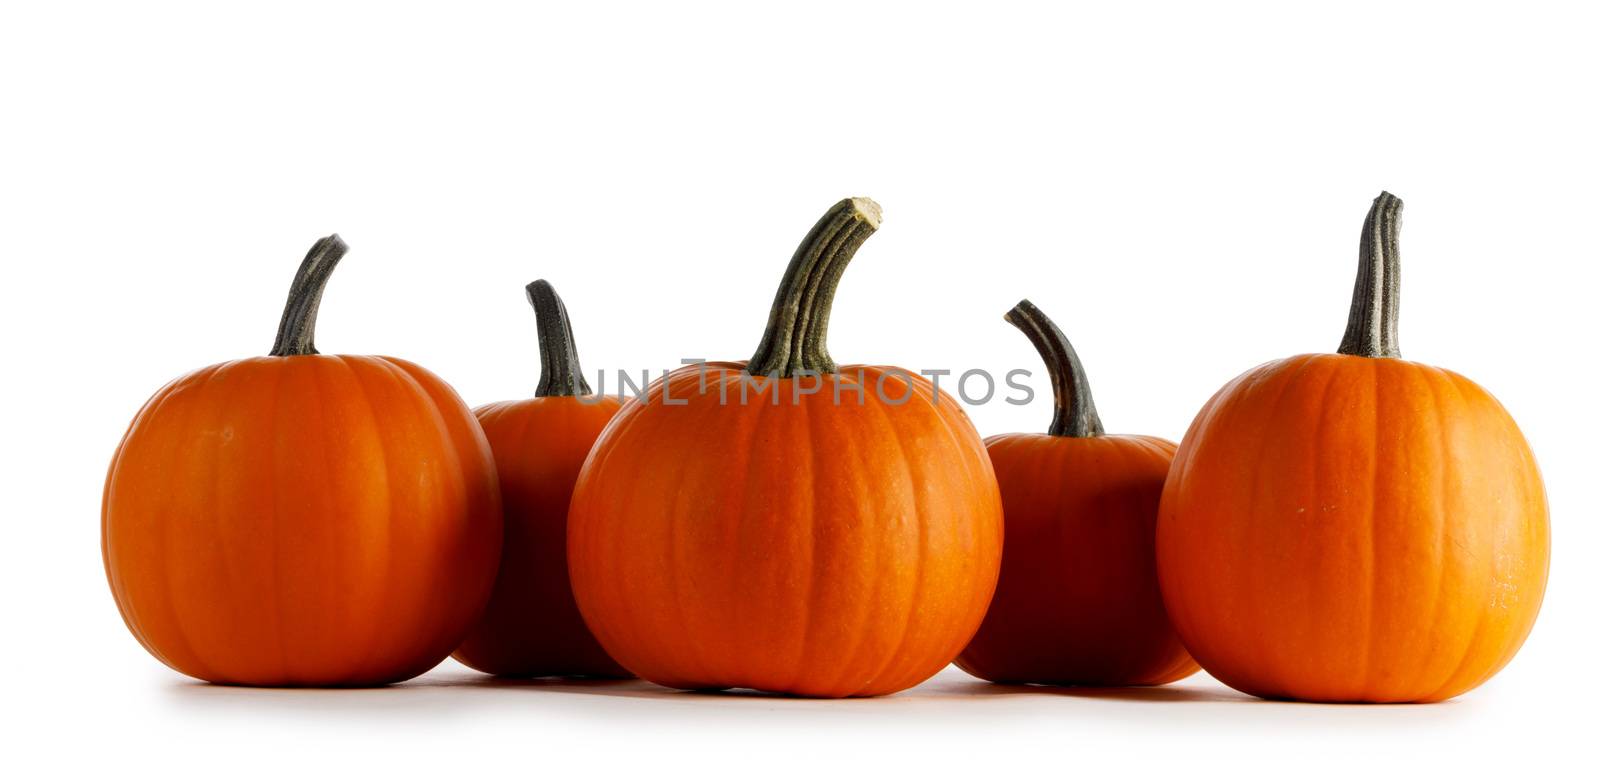 Pumpkins in a row isolated on white by Yellowj